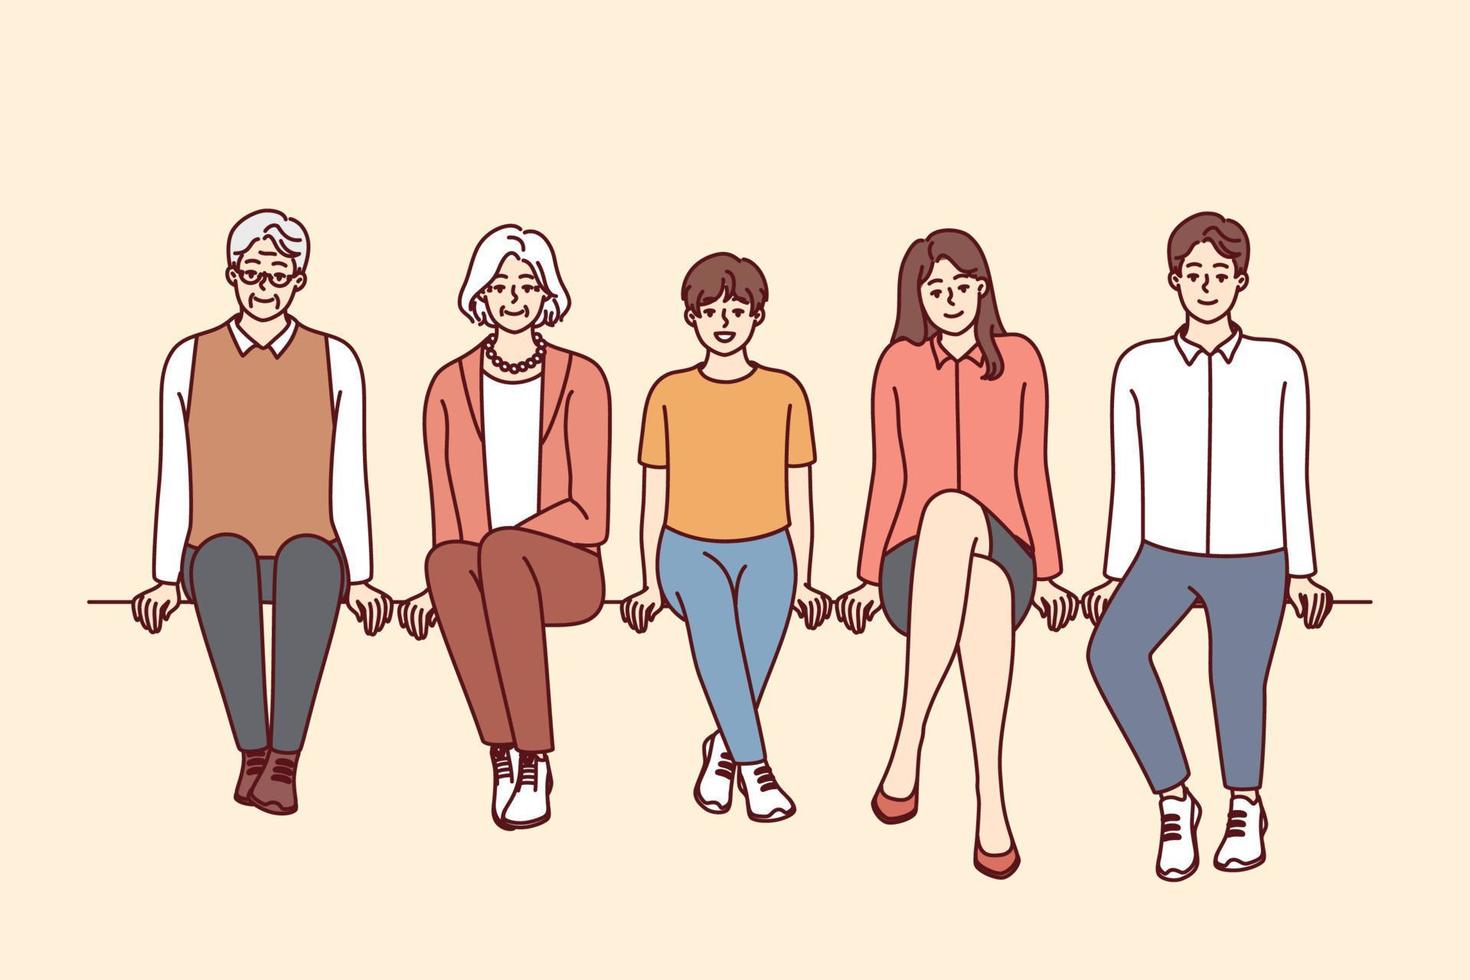 People of different ages dressed in casual style sit in row and look at screen. Young and old men and women from one big family spend time together with smile. Flat vector illustration